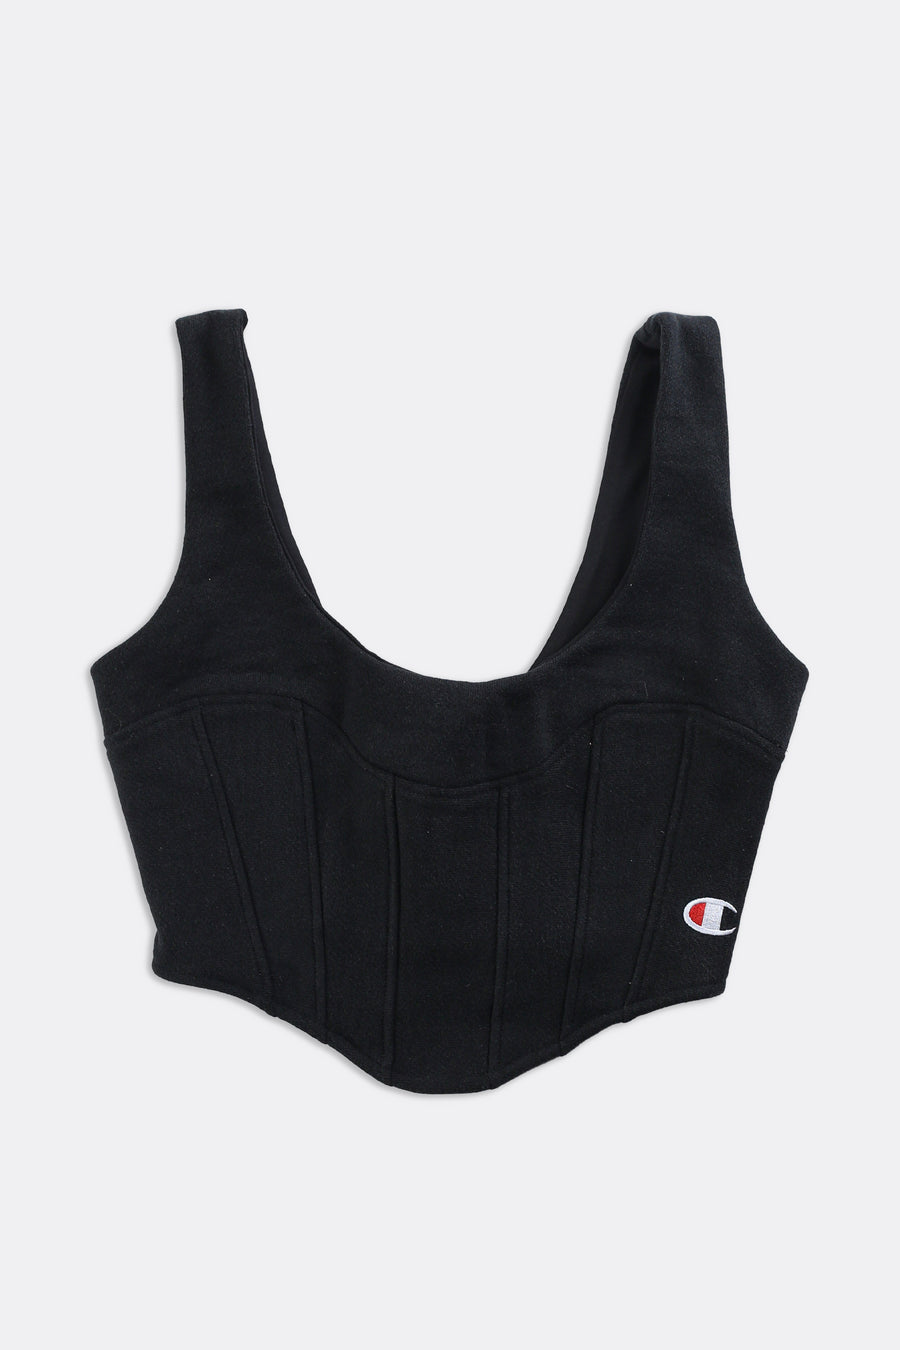 Rework Adidas Track Bustier - XS, S, M, L – Frankie Collective